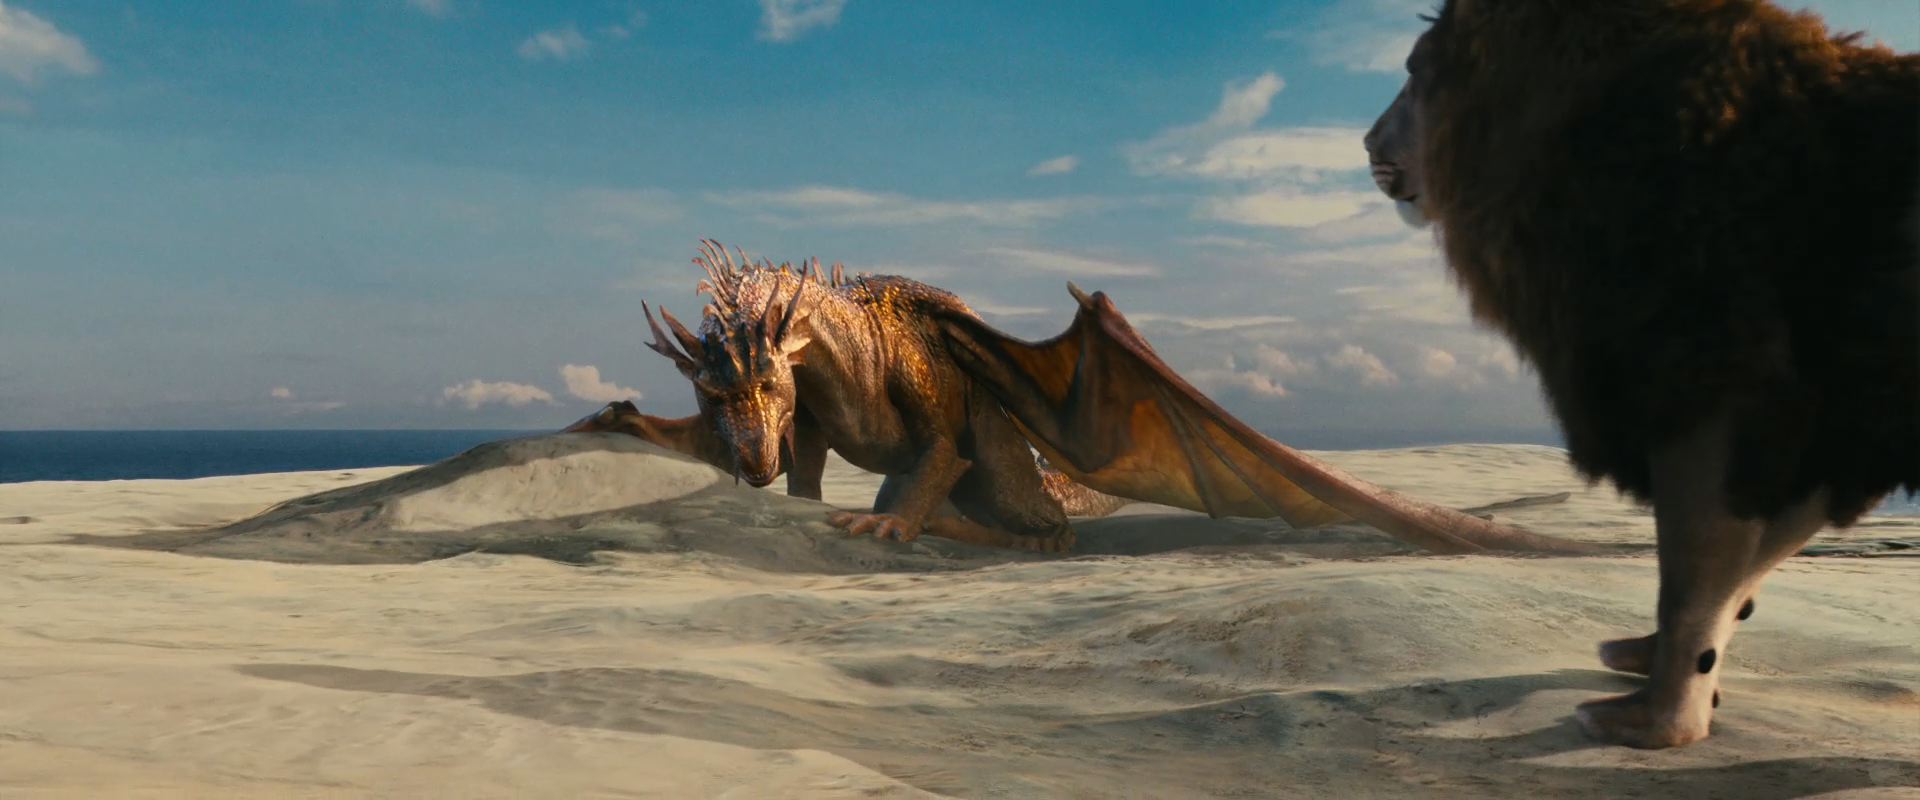 Aslan And The Dragon From Chronicles Of Narnia Voyage - Voyage Of The Dawn Treader Dragon , HD Wallpaper & Backgrounds